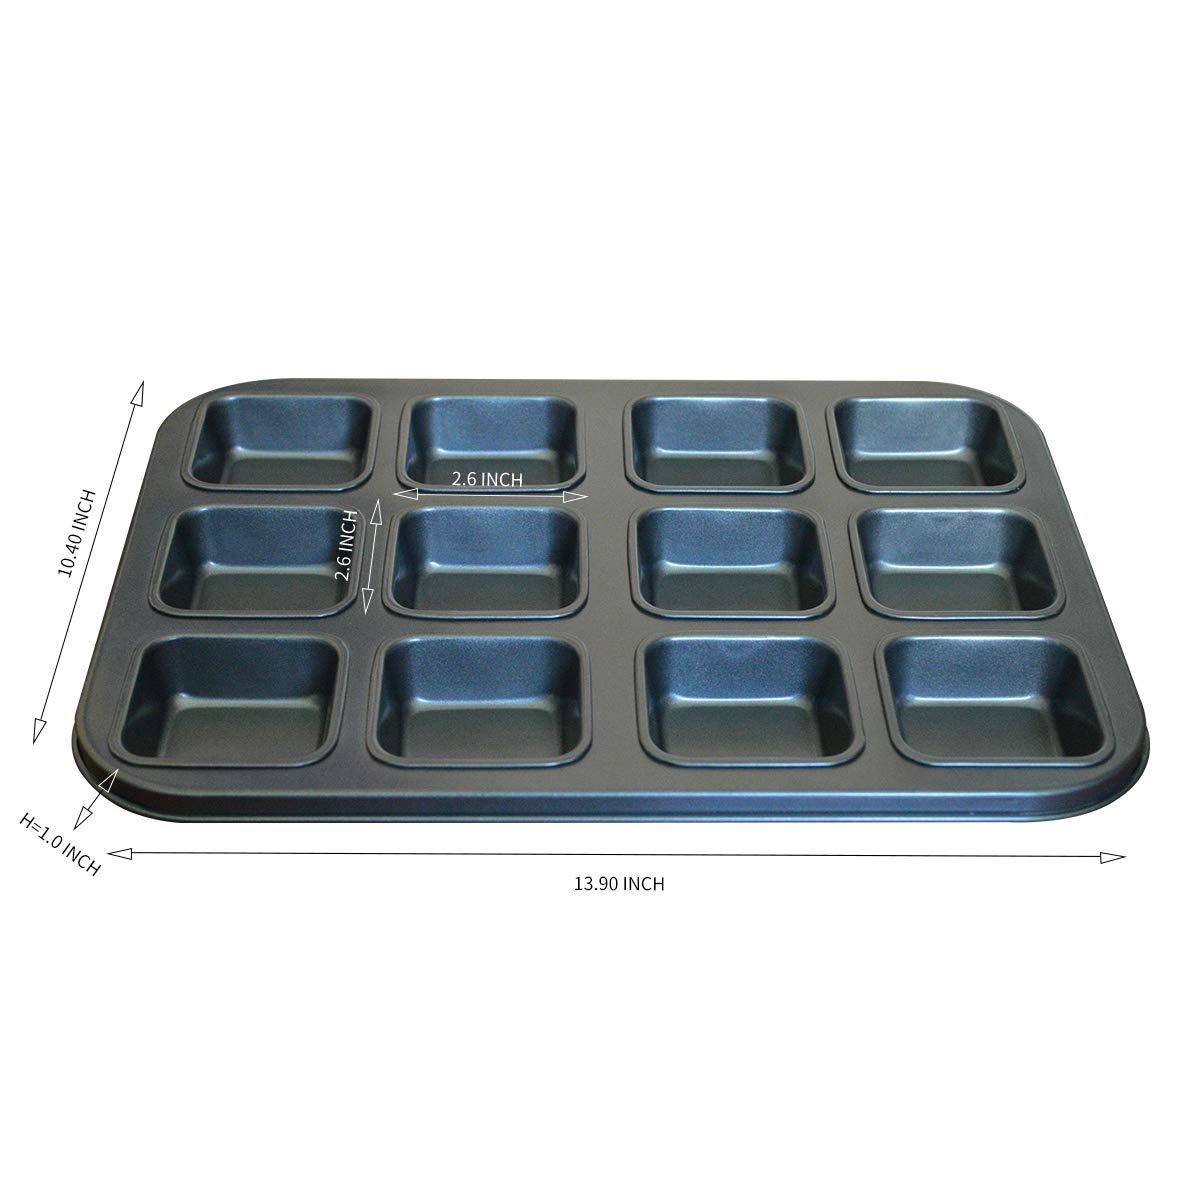 Twscvc Loaf Pan,Brownie Cake Pan, 12-Cavity Non-Stick Square Muffin Pan Blondie Bakeware, Heavy Duty Carbon Steel Pan for Oven Baking -Gray - CookCave